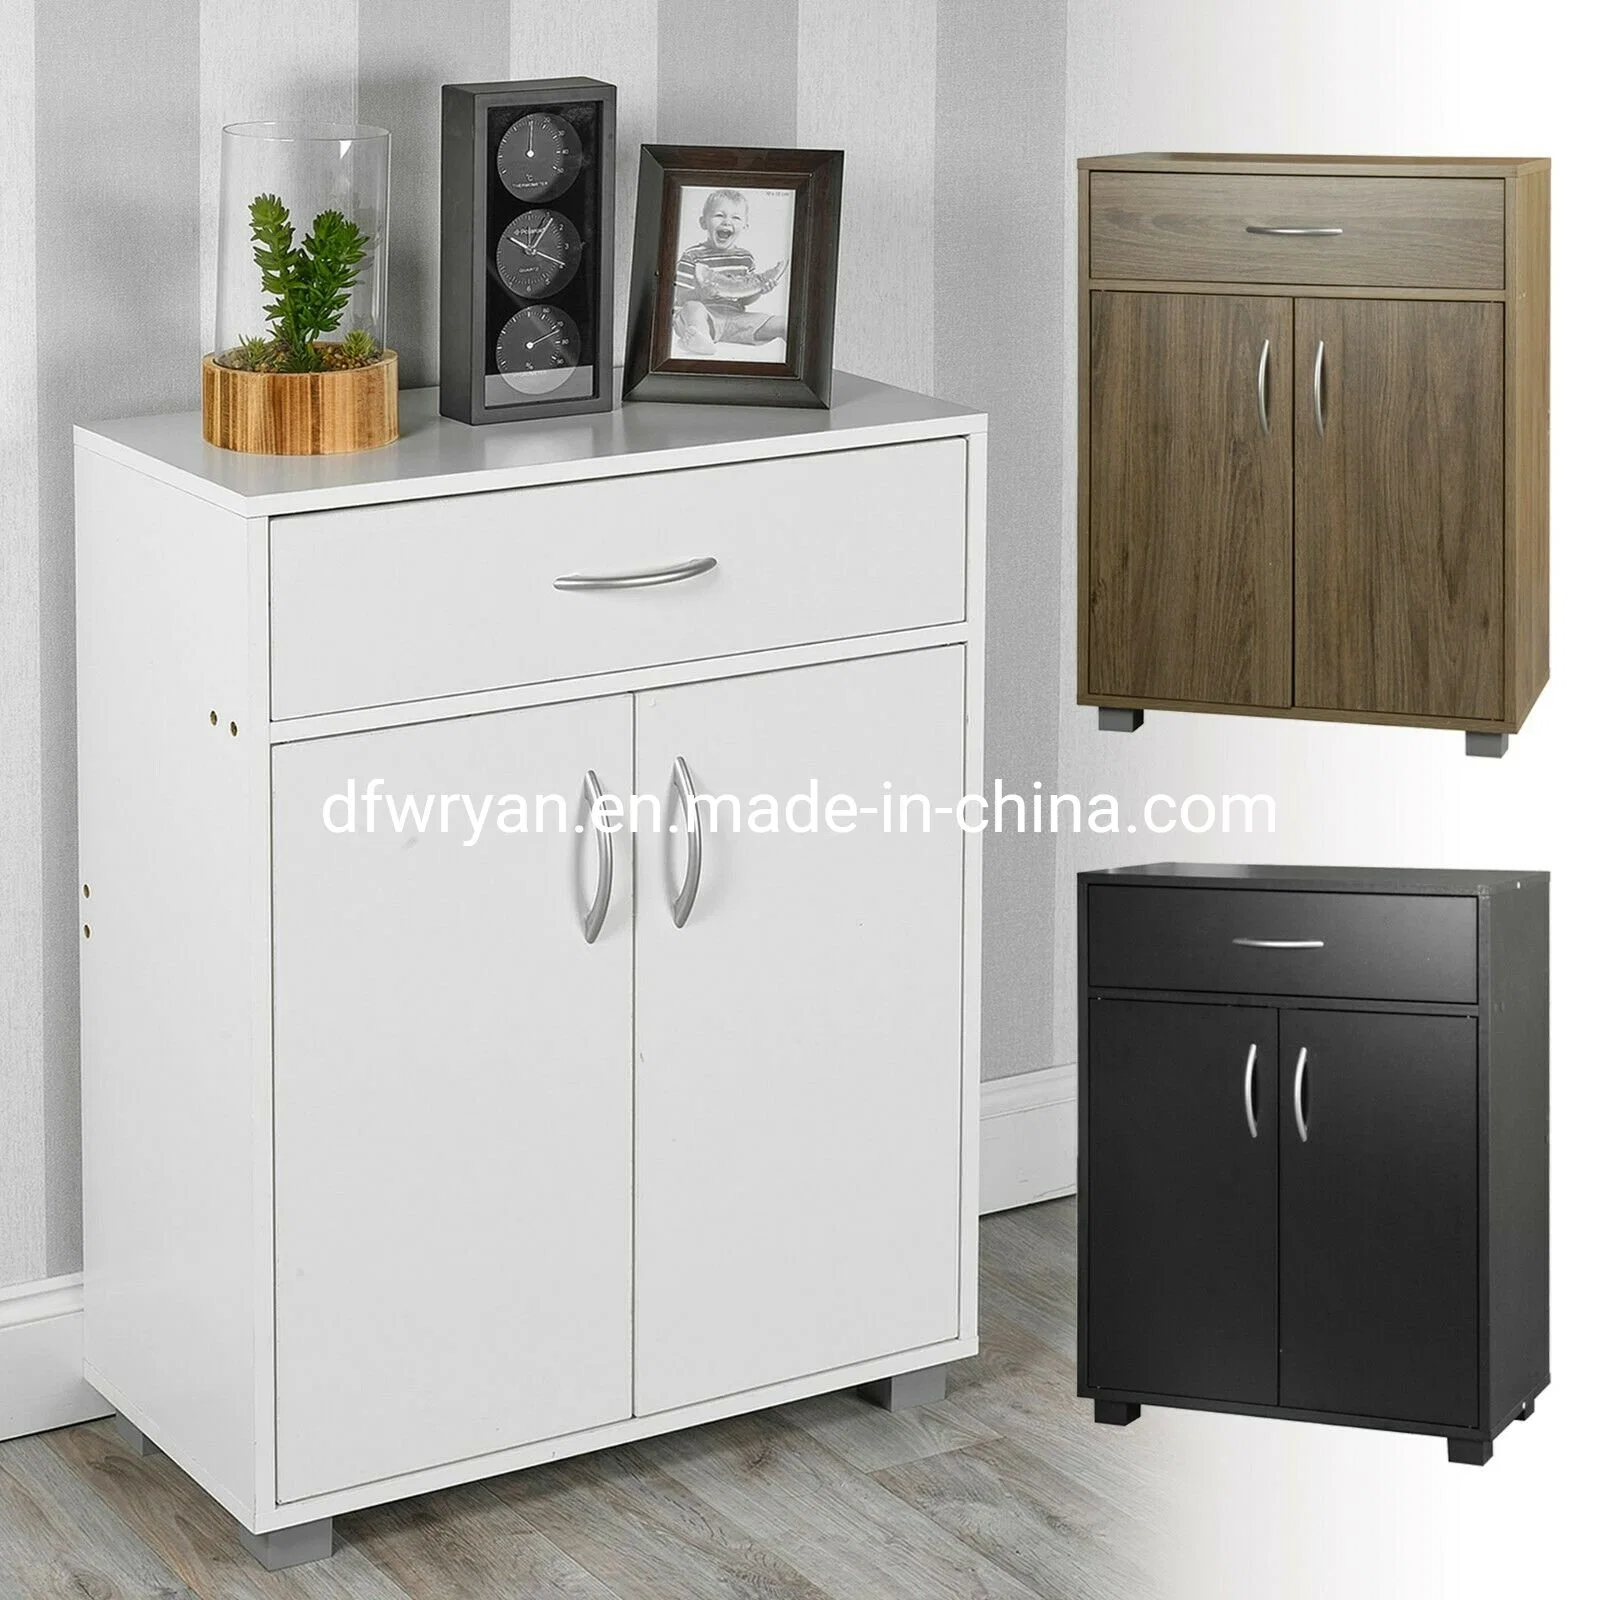 White Color Small 2 Door 1 Drawer Hallway Living Room Sideboard Wooden Storage Cabinet Unit